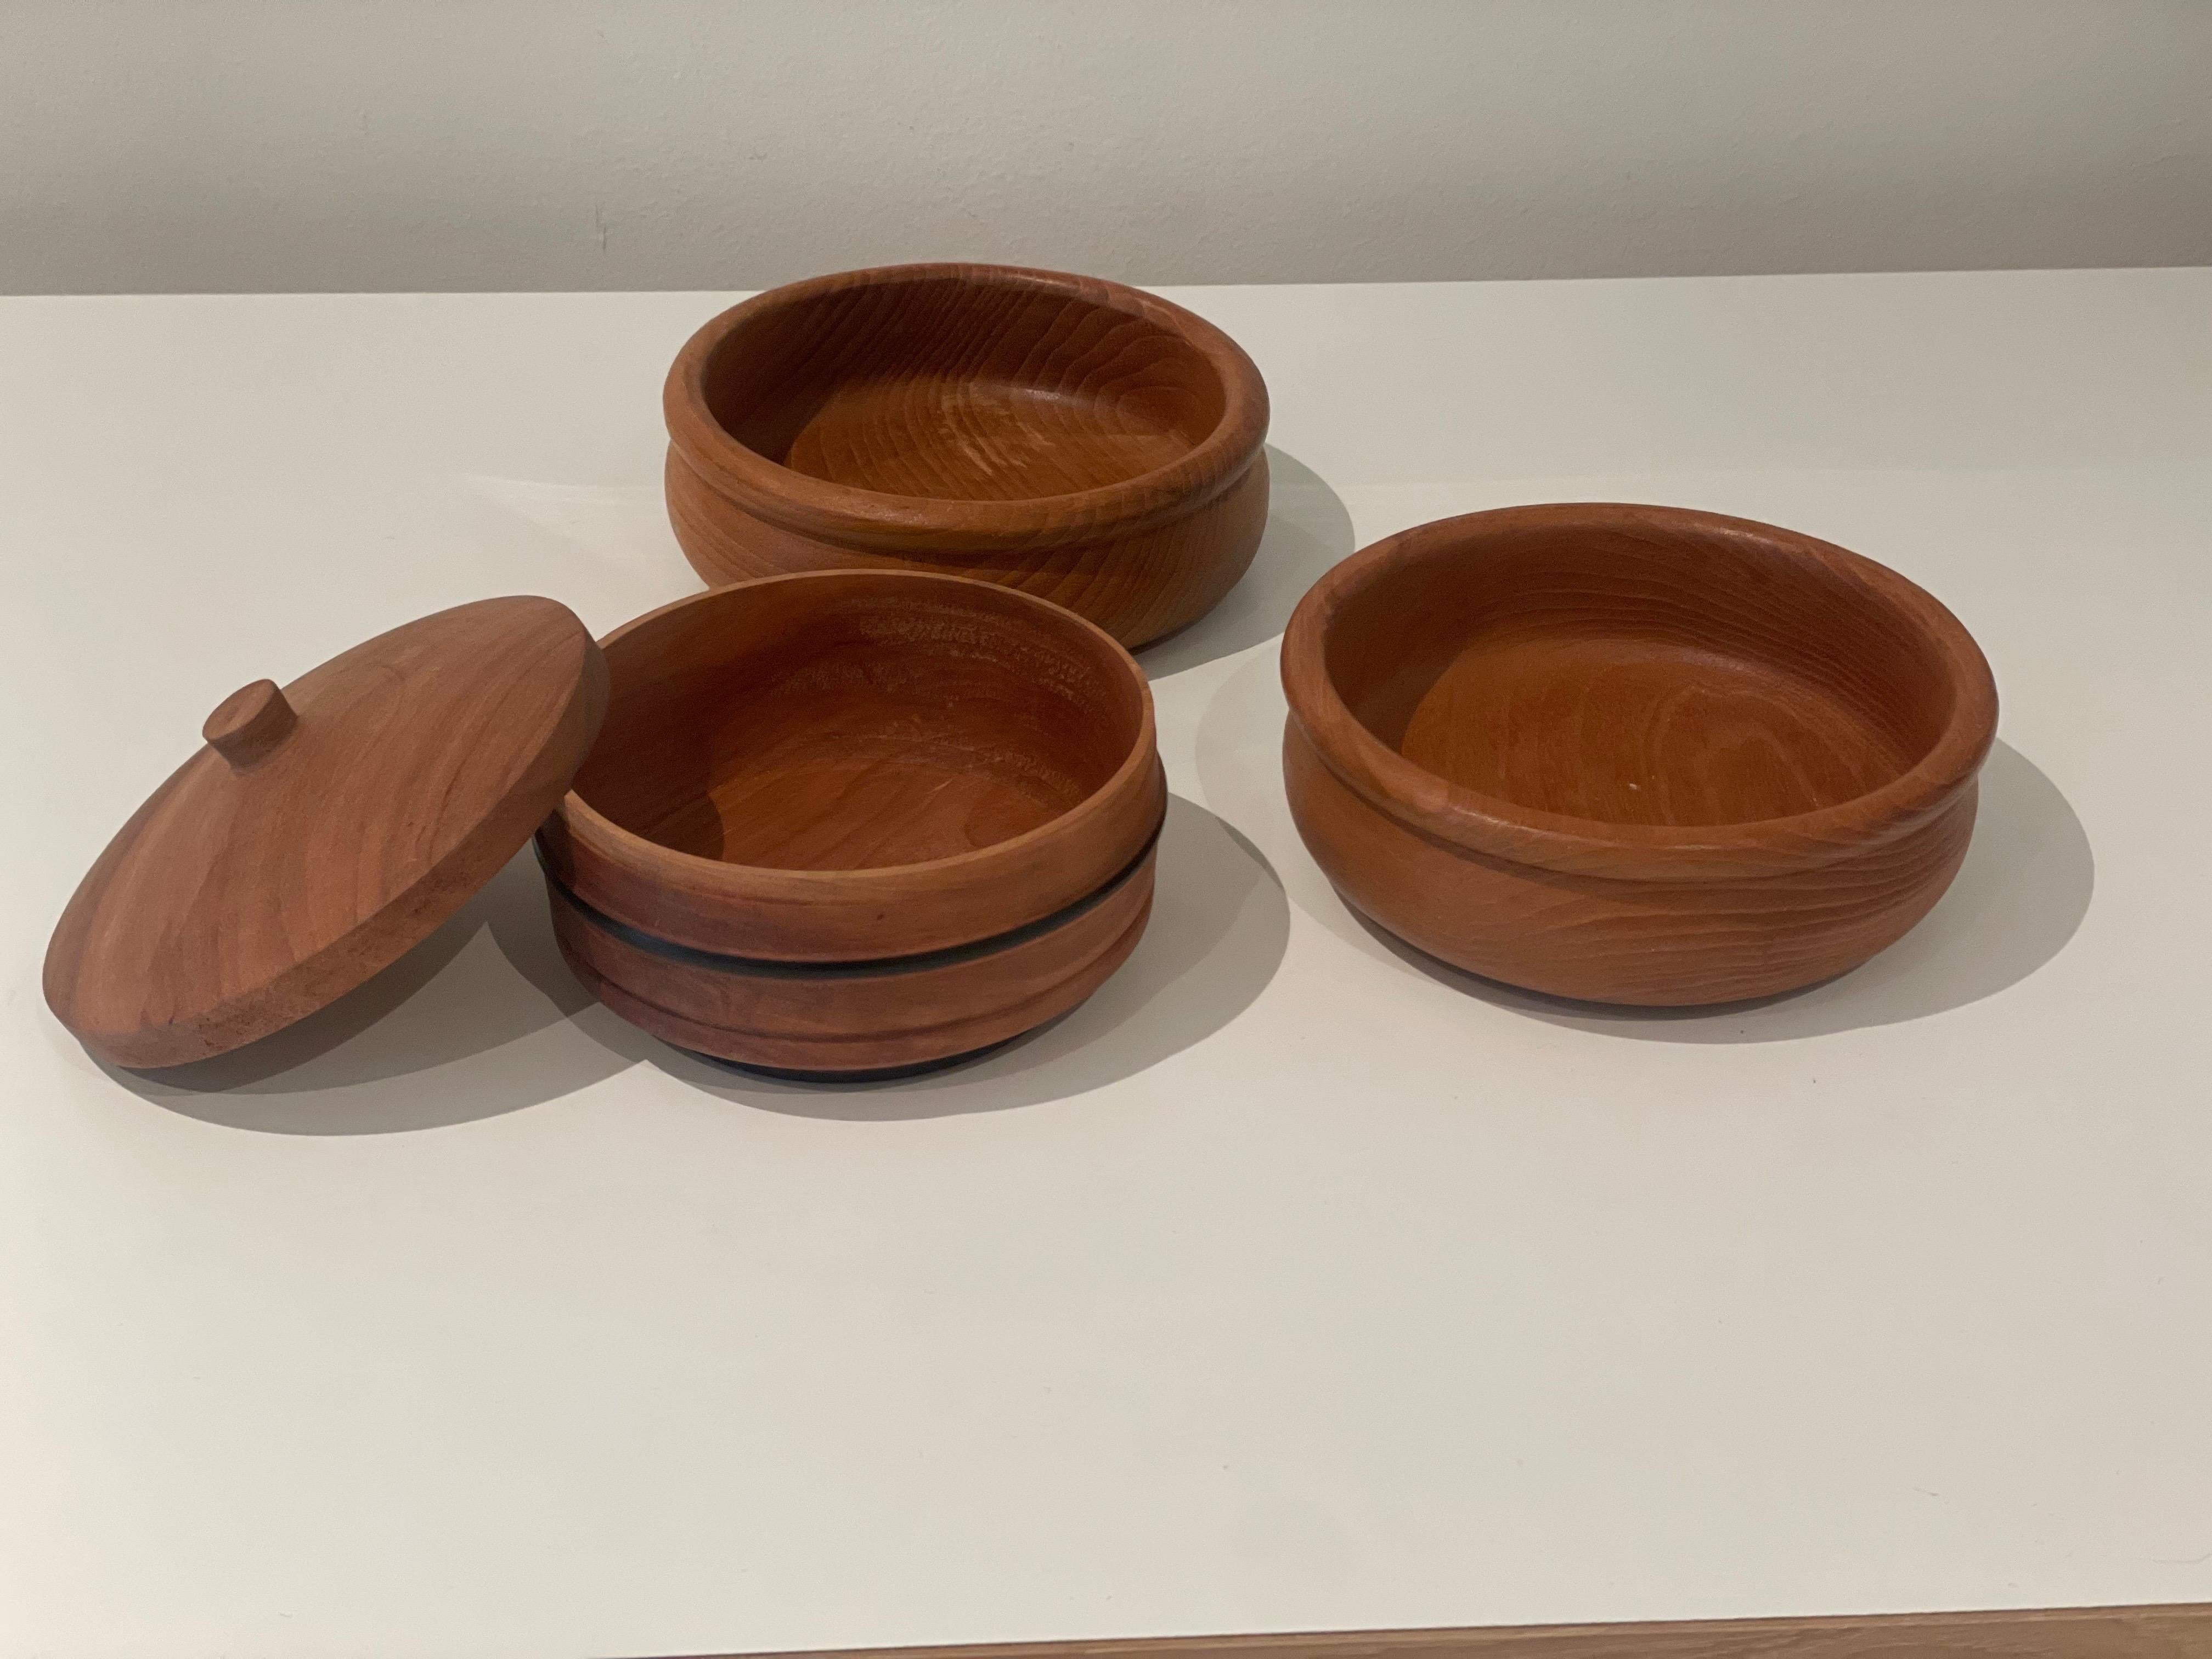 A set of four vintage teak bowls from the 60 - 70s.
Made in Norway.


1. Diameter 13 cm, Height 8 cm 
2. Diameter 15 cm, Height 5 cm
3. Diameter 15 cm, Height 5 cm
4: Diameter 20 cm, Height 5 cm